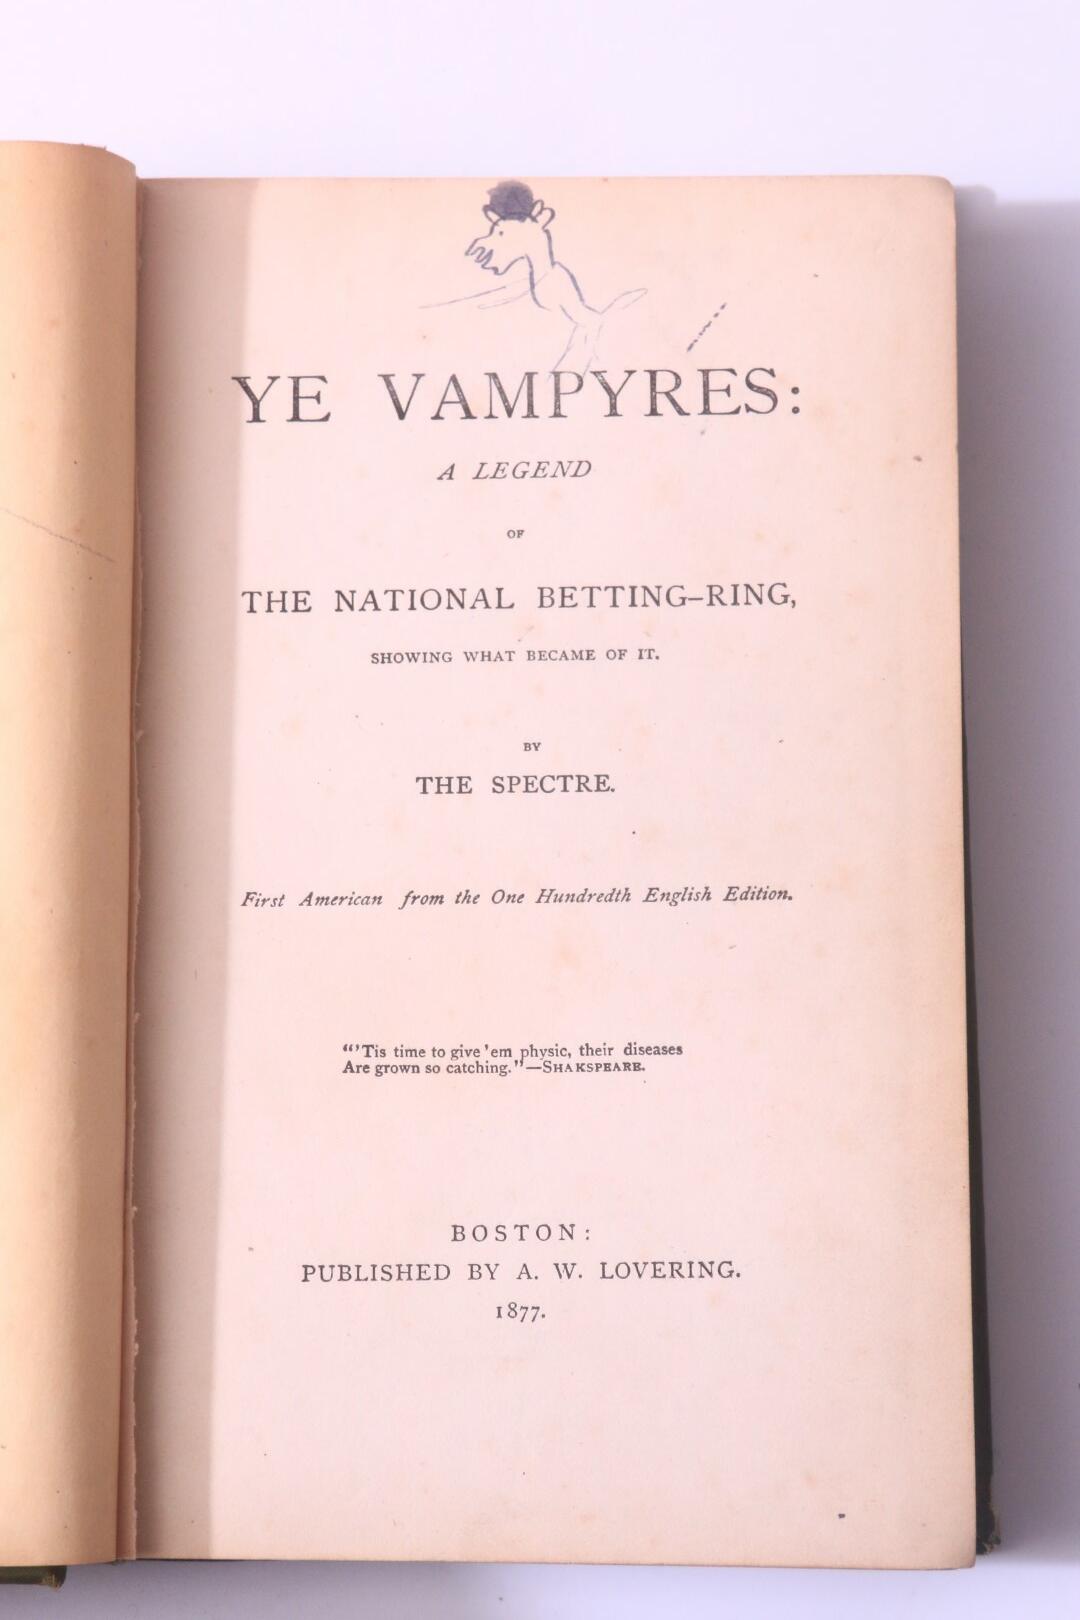 The Spectre - Ye Vampyres: A Legend of the National Betting-Ring, Showing What Became of It. - A.W. Lovering, 1877, First Edition.